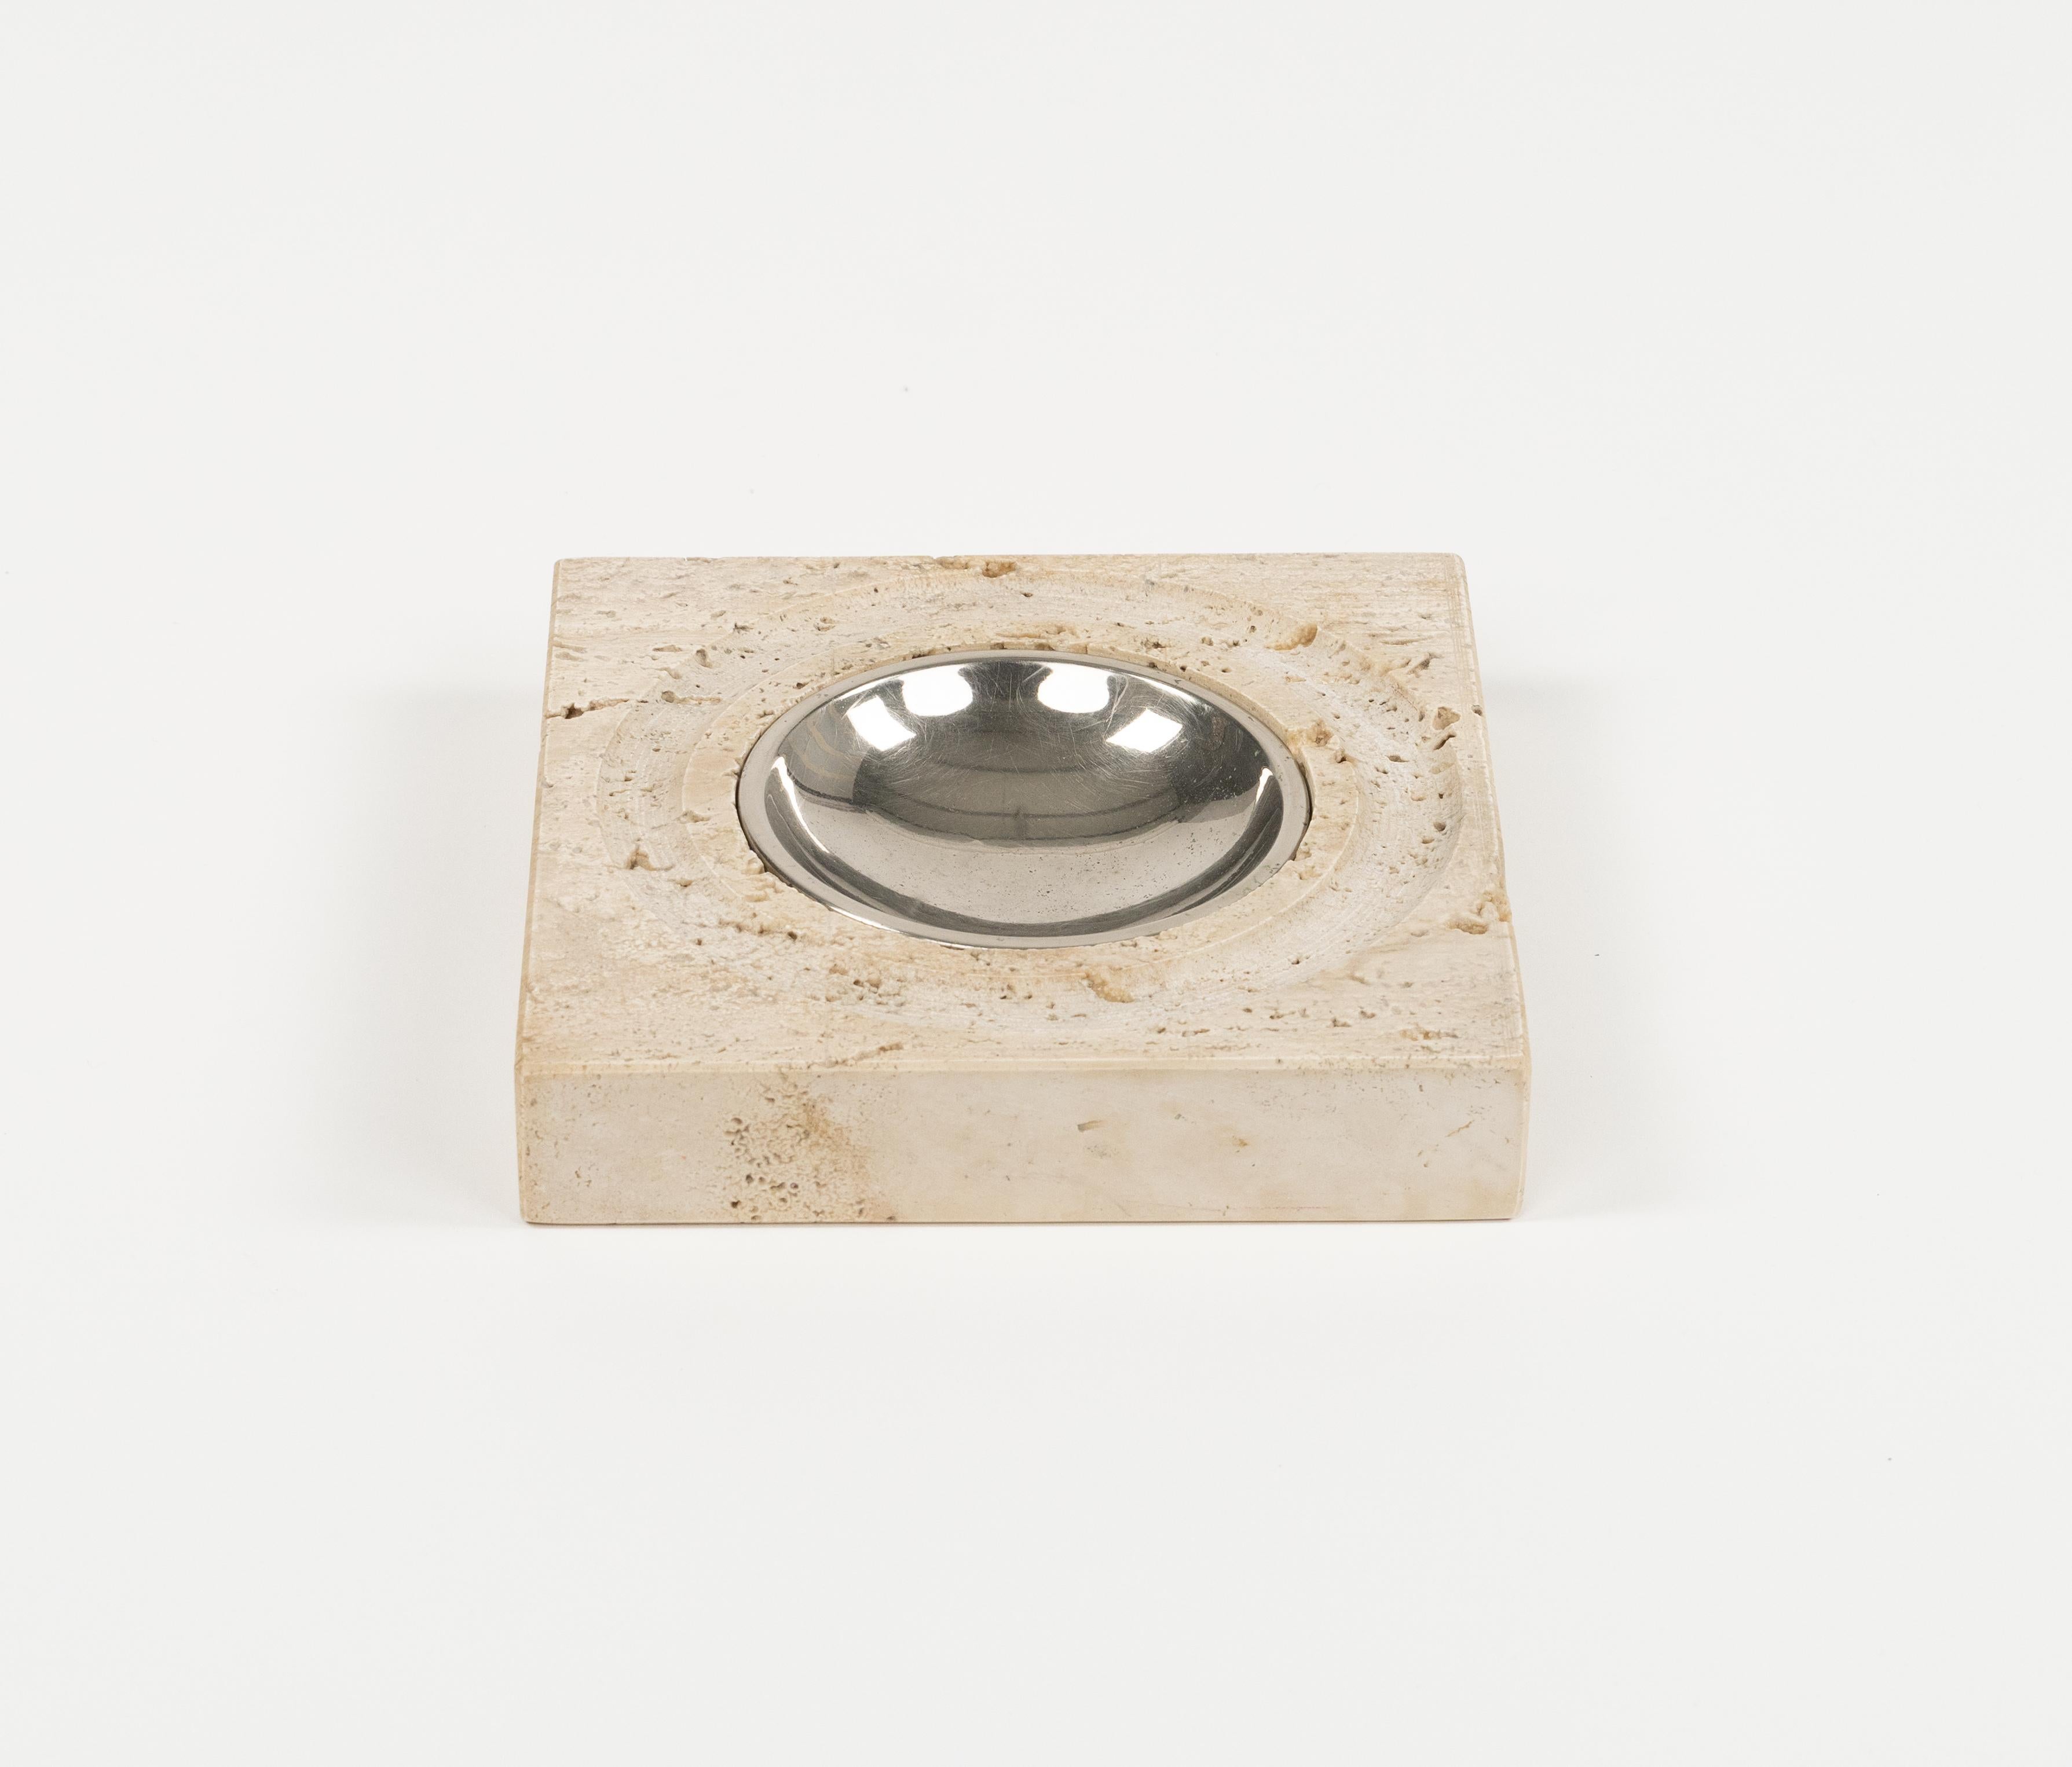 Midcentury Travertine Ashtray or Vide-Poche by Fratelli Mannelli, Italy 1970s For Sale 4